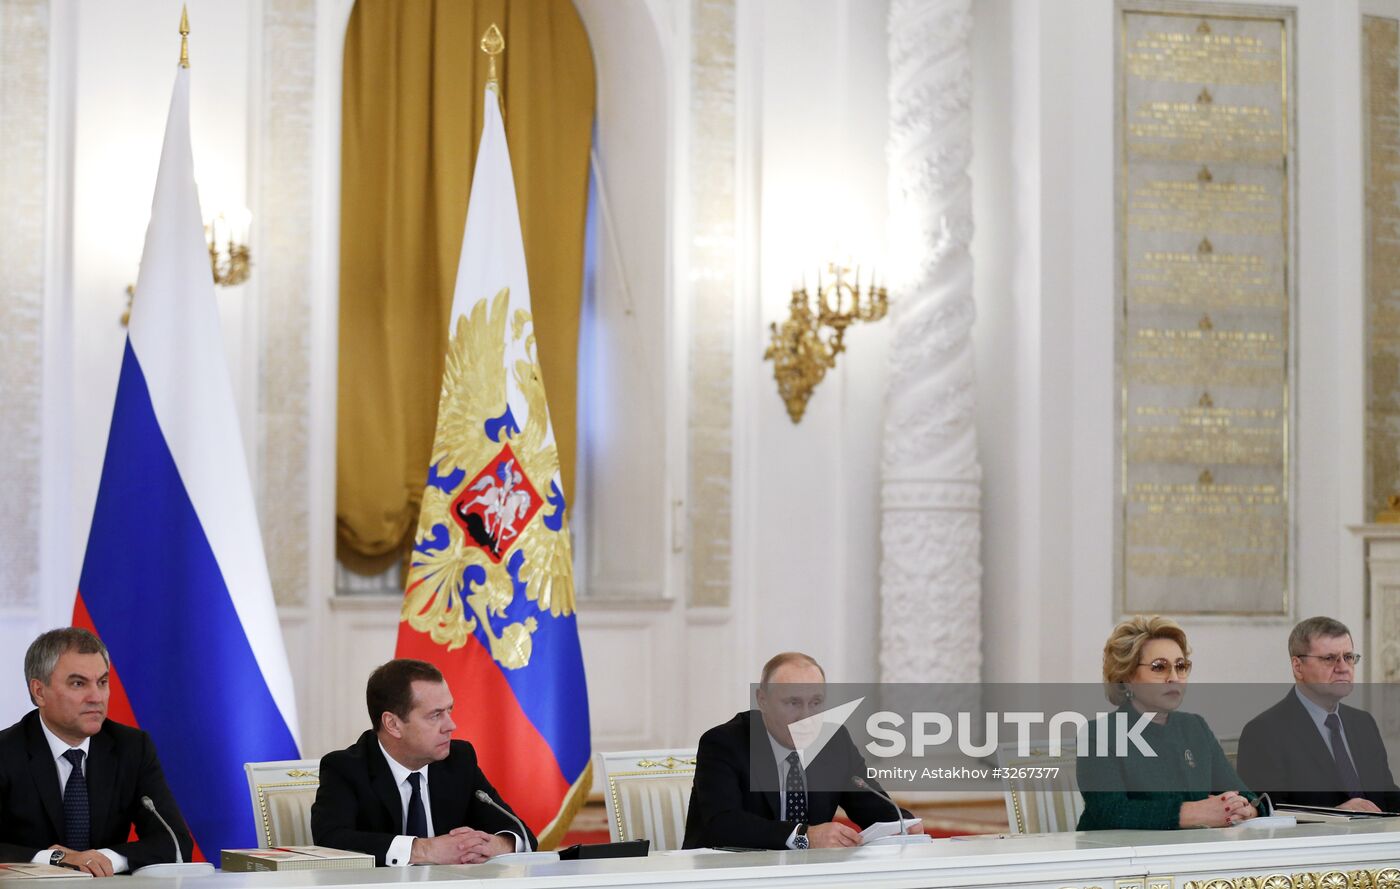 President Putin chairs meeting of State Council on regions' investment attractiveness